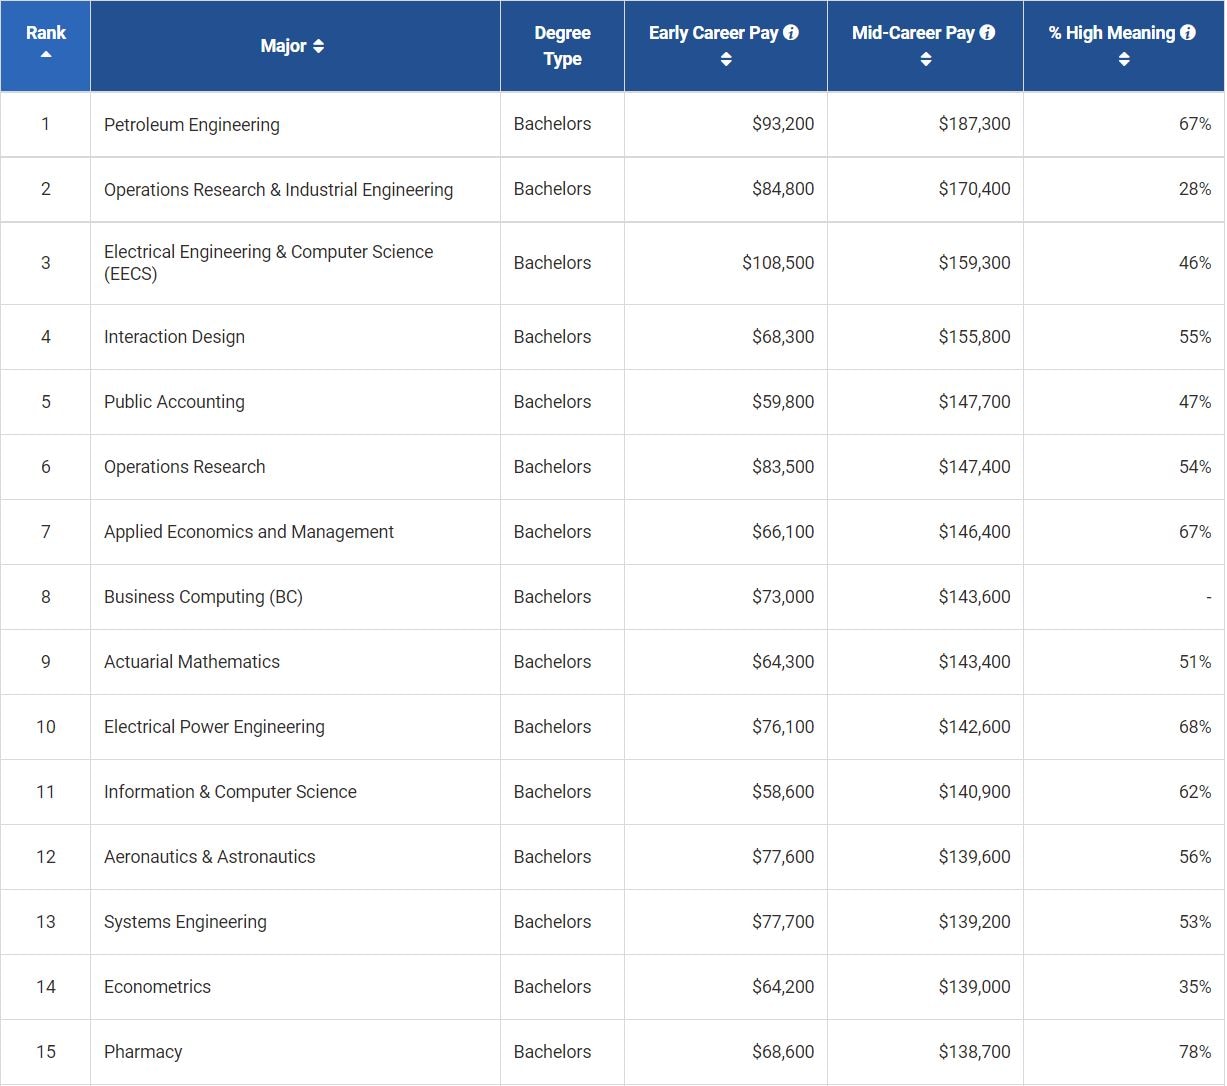 The list of the top 15 highest paying Bachelor degrees by salary potential